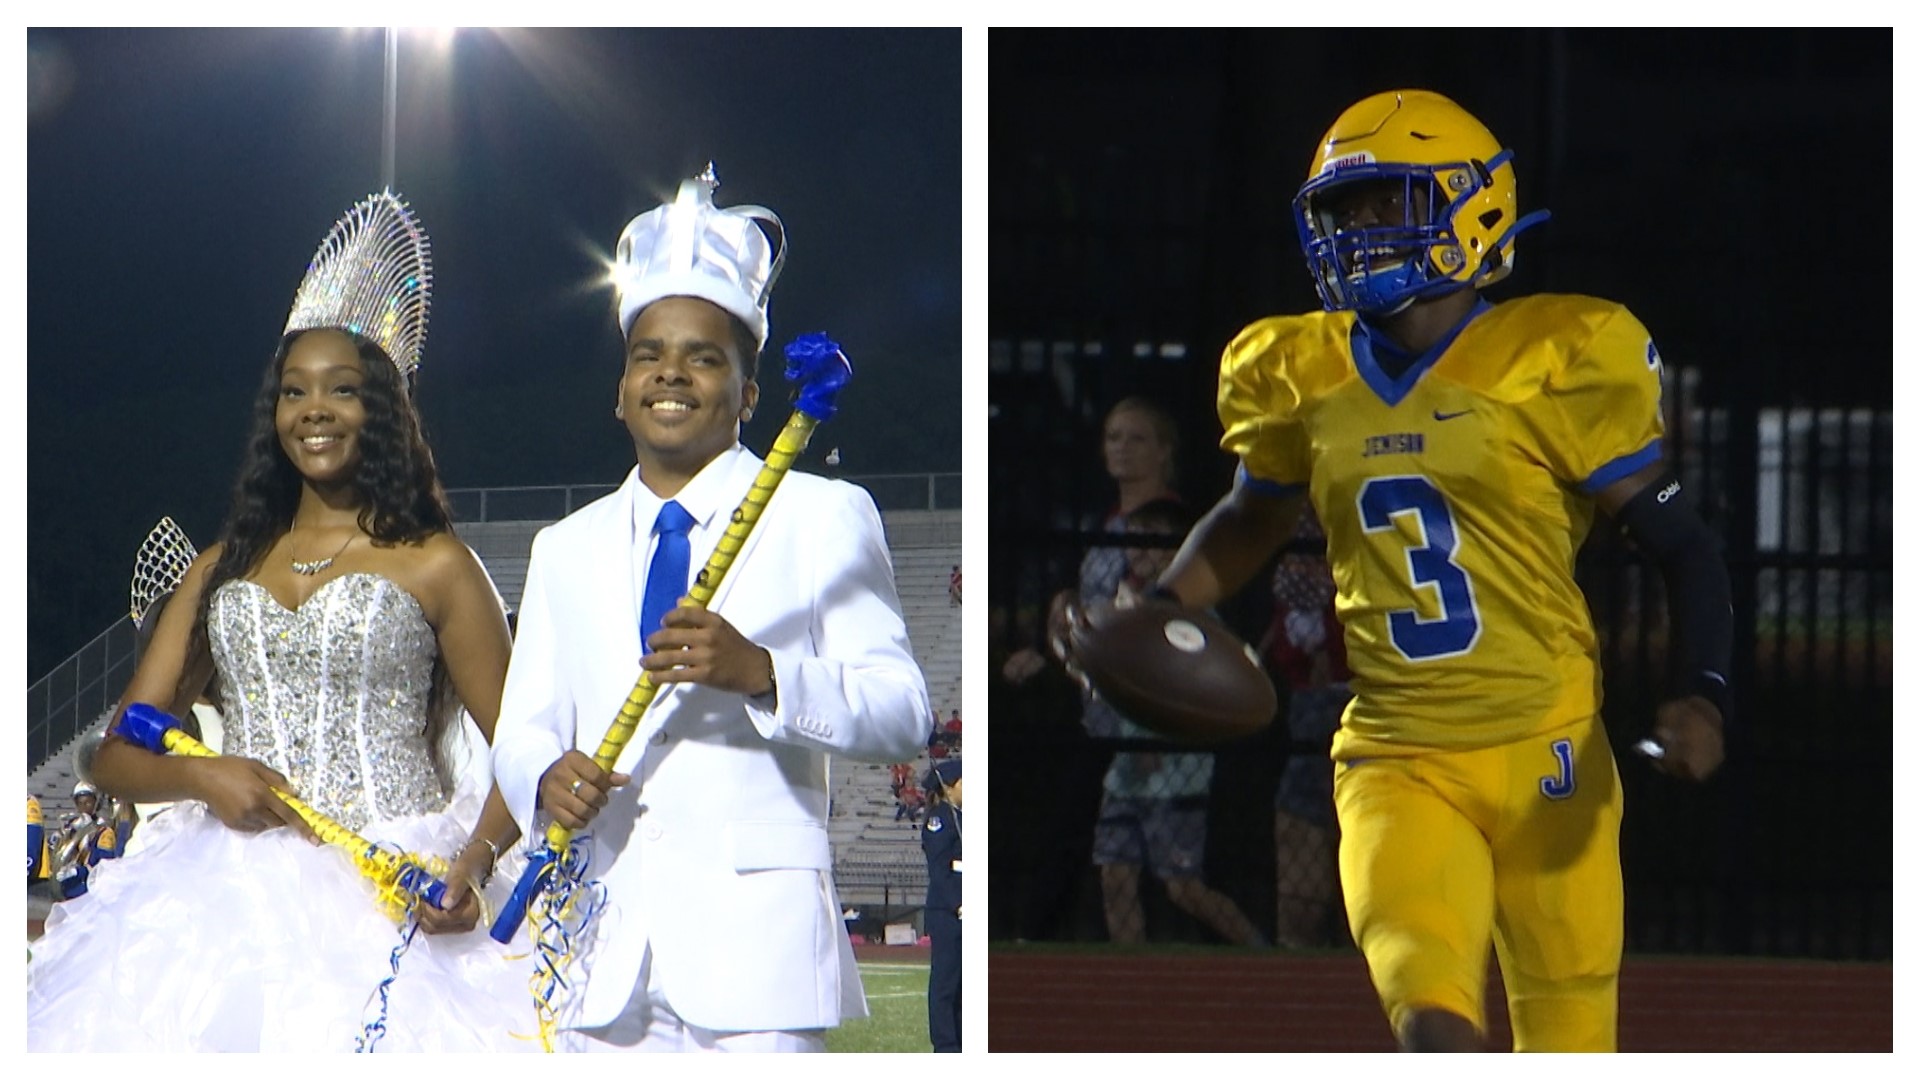 Three 1st half touchdowns by Kel Woods propelled the Mae Jemison Jaguars to a 54-21 victory over Lawrence County